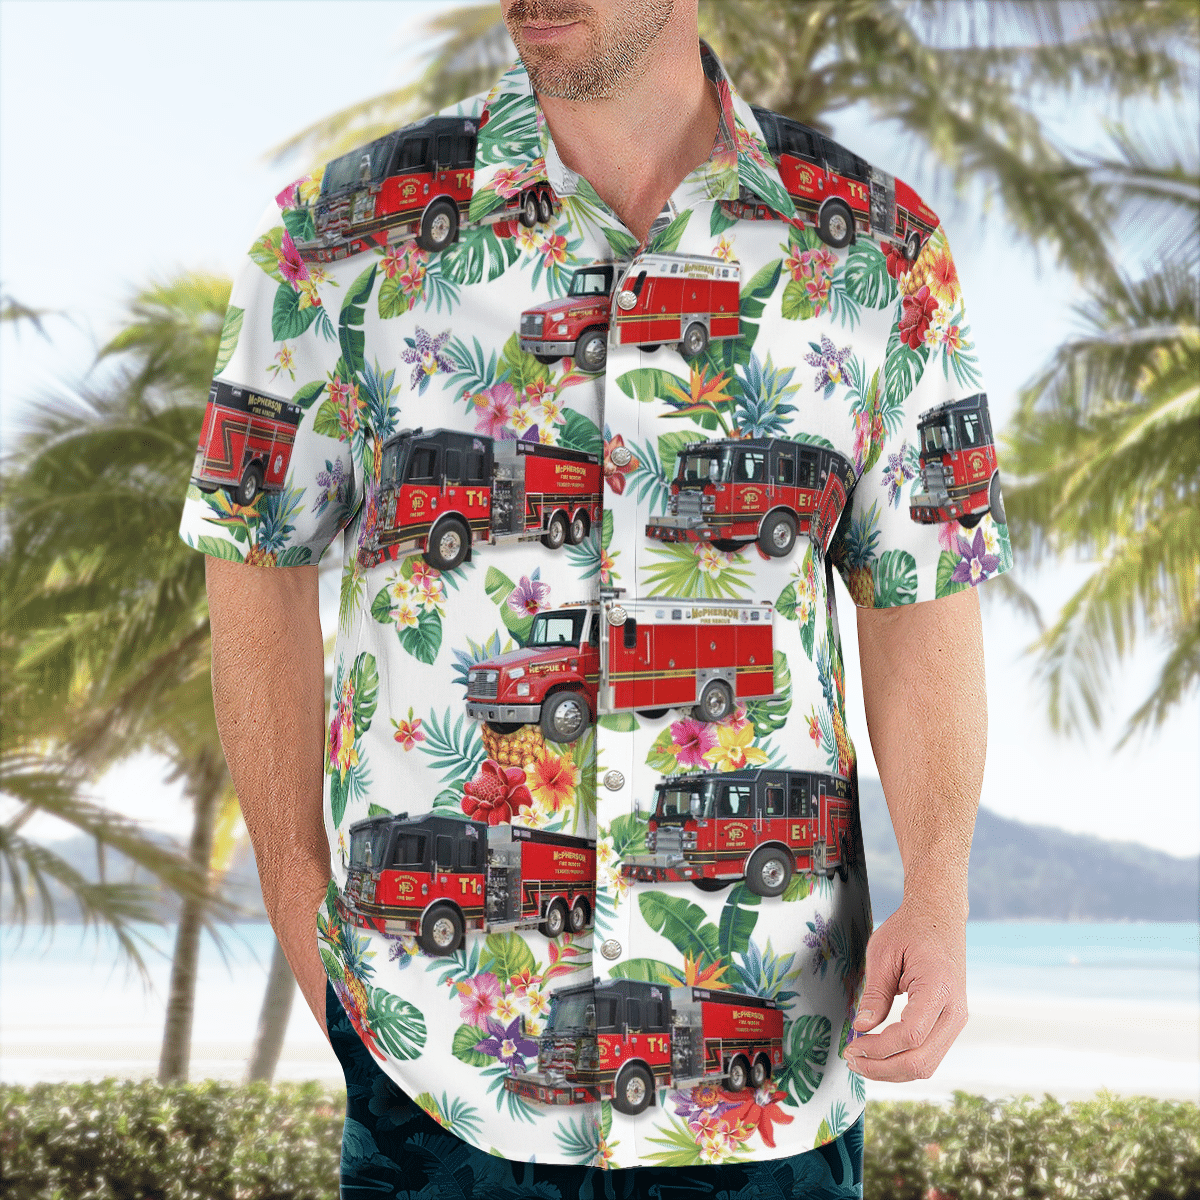 There are several styles of beach and Hawaiian shorts and tops to choose from 250